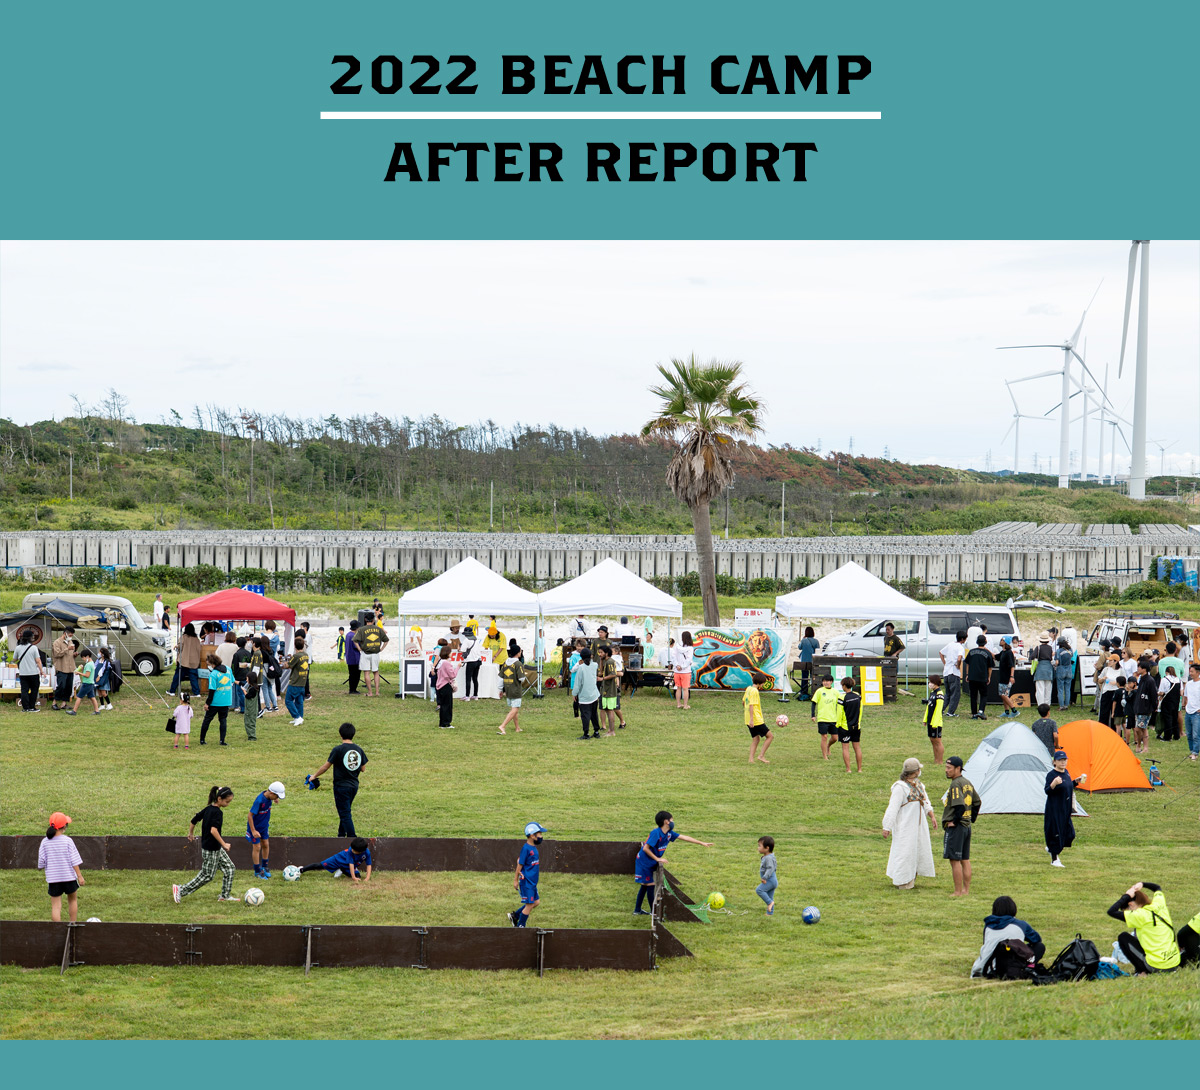 2022 Beach Camp After Report title